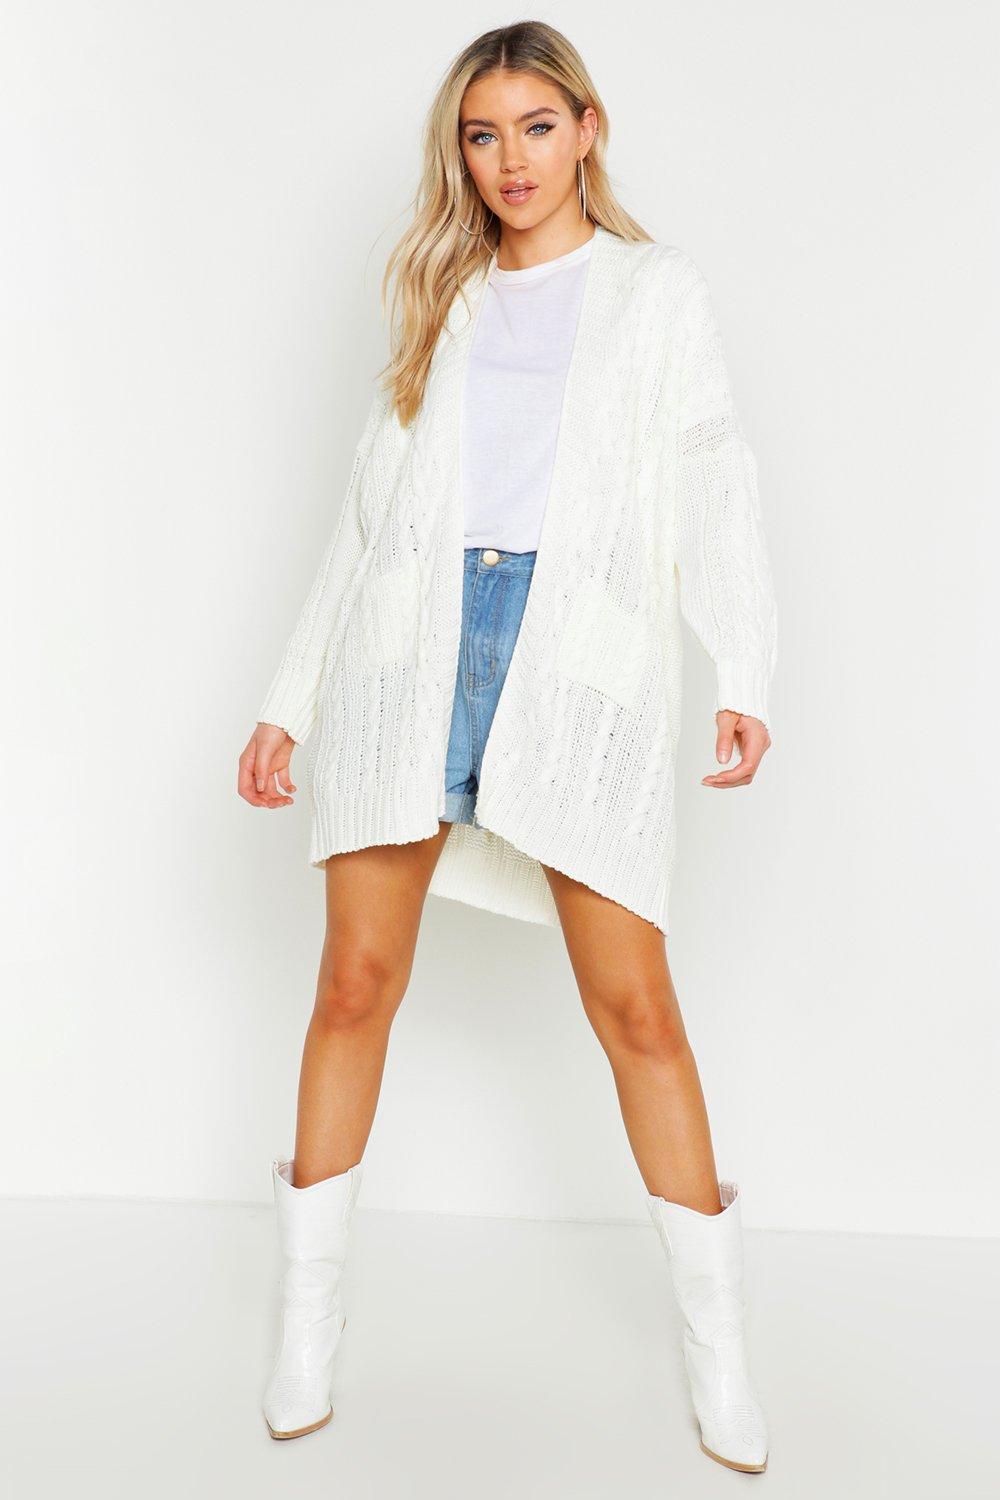 Boohoo Womens Slouchy Cable Knit Cardigan in White - Lyst